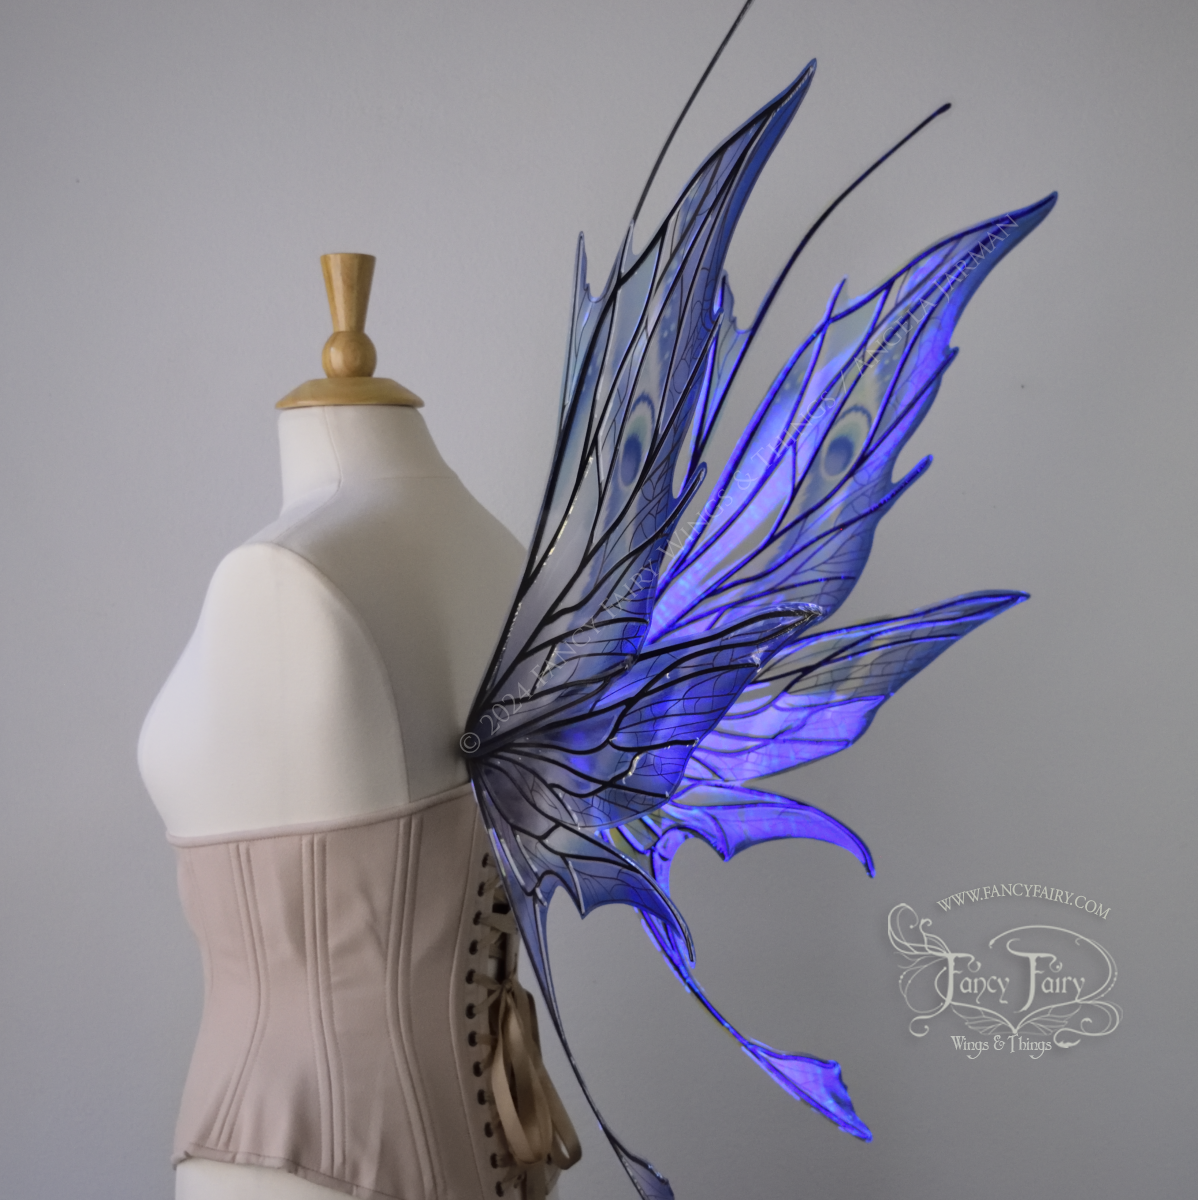 Back 3/4 view of large spikey blue painted iridescent fairy wings with antennae along the top & black detailed veins, displayed on dress form. 